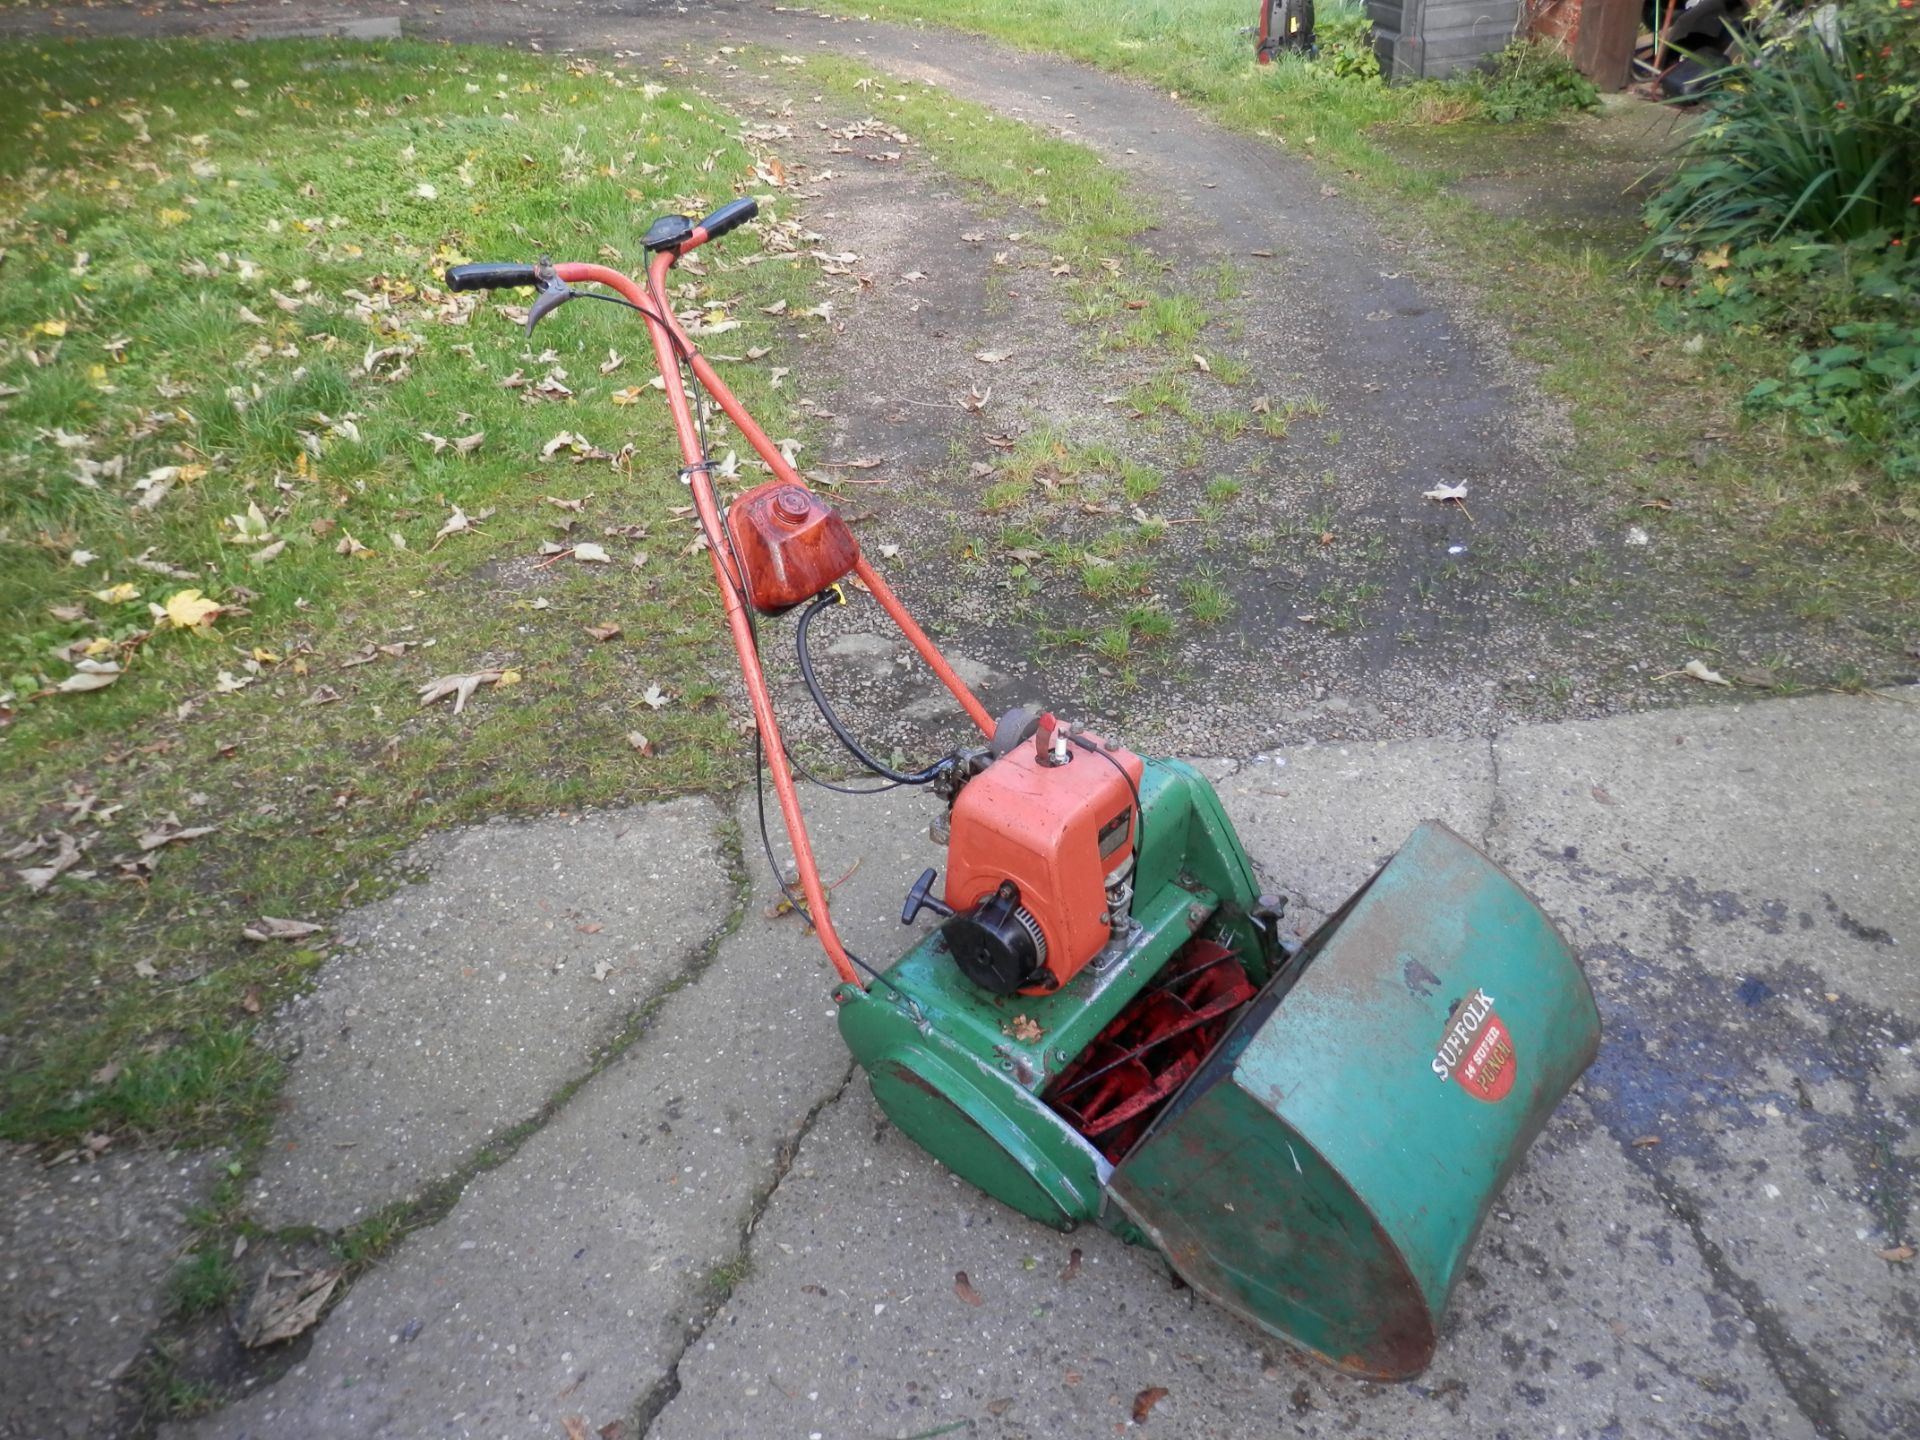 1960S WORKING VINTAGE SUFFOLK "PUNCH" PETROL 14" SELF PROPELLED LAWN MOVER.